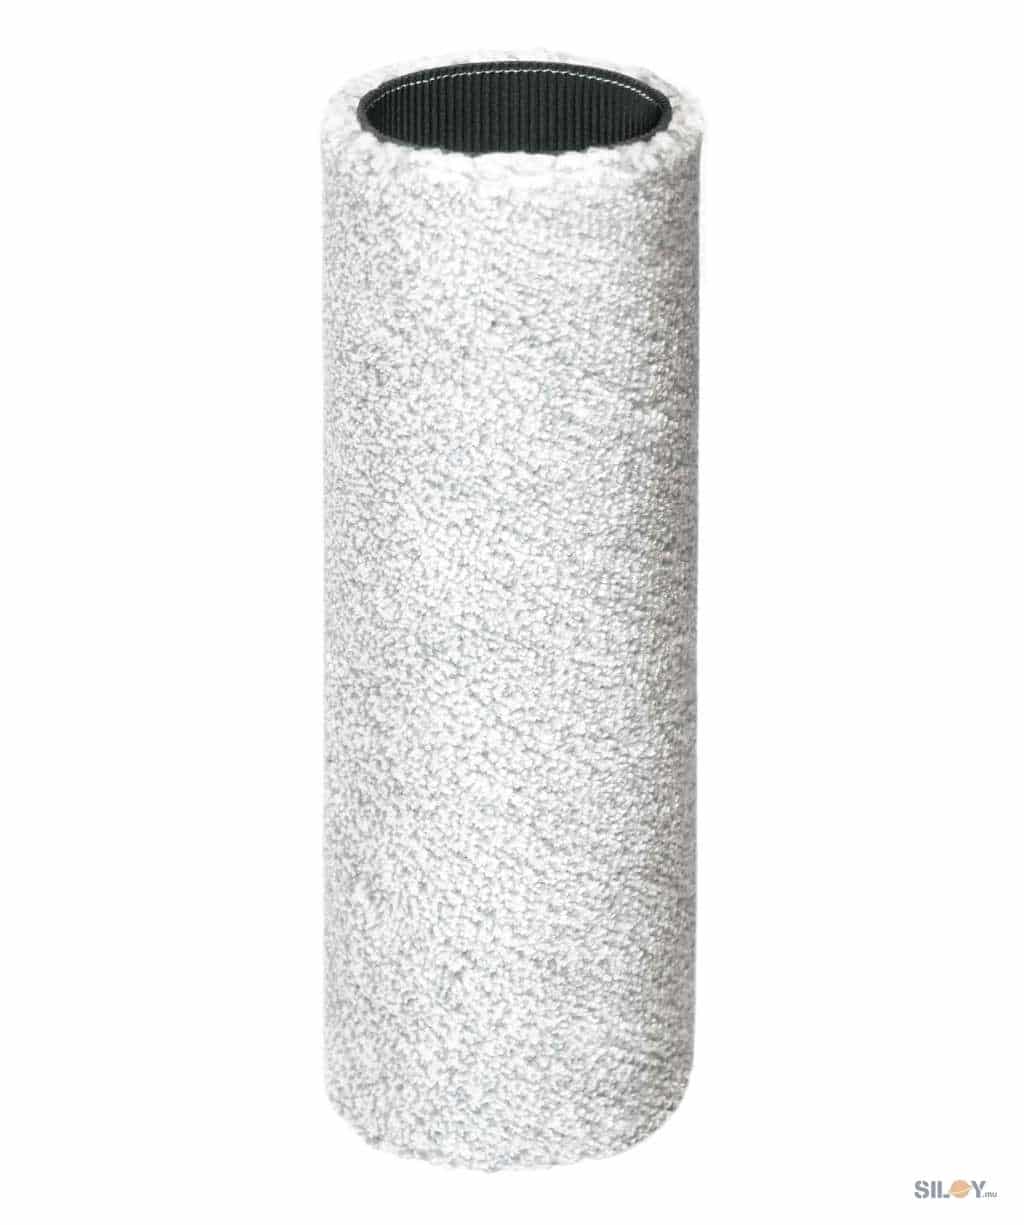 xiaomi replacement filter for truclean w10 pro wet dry vacuum (copy)